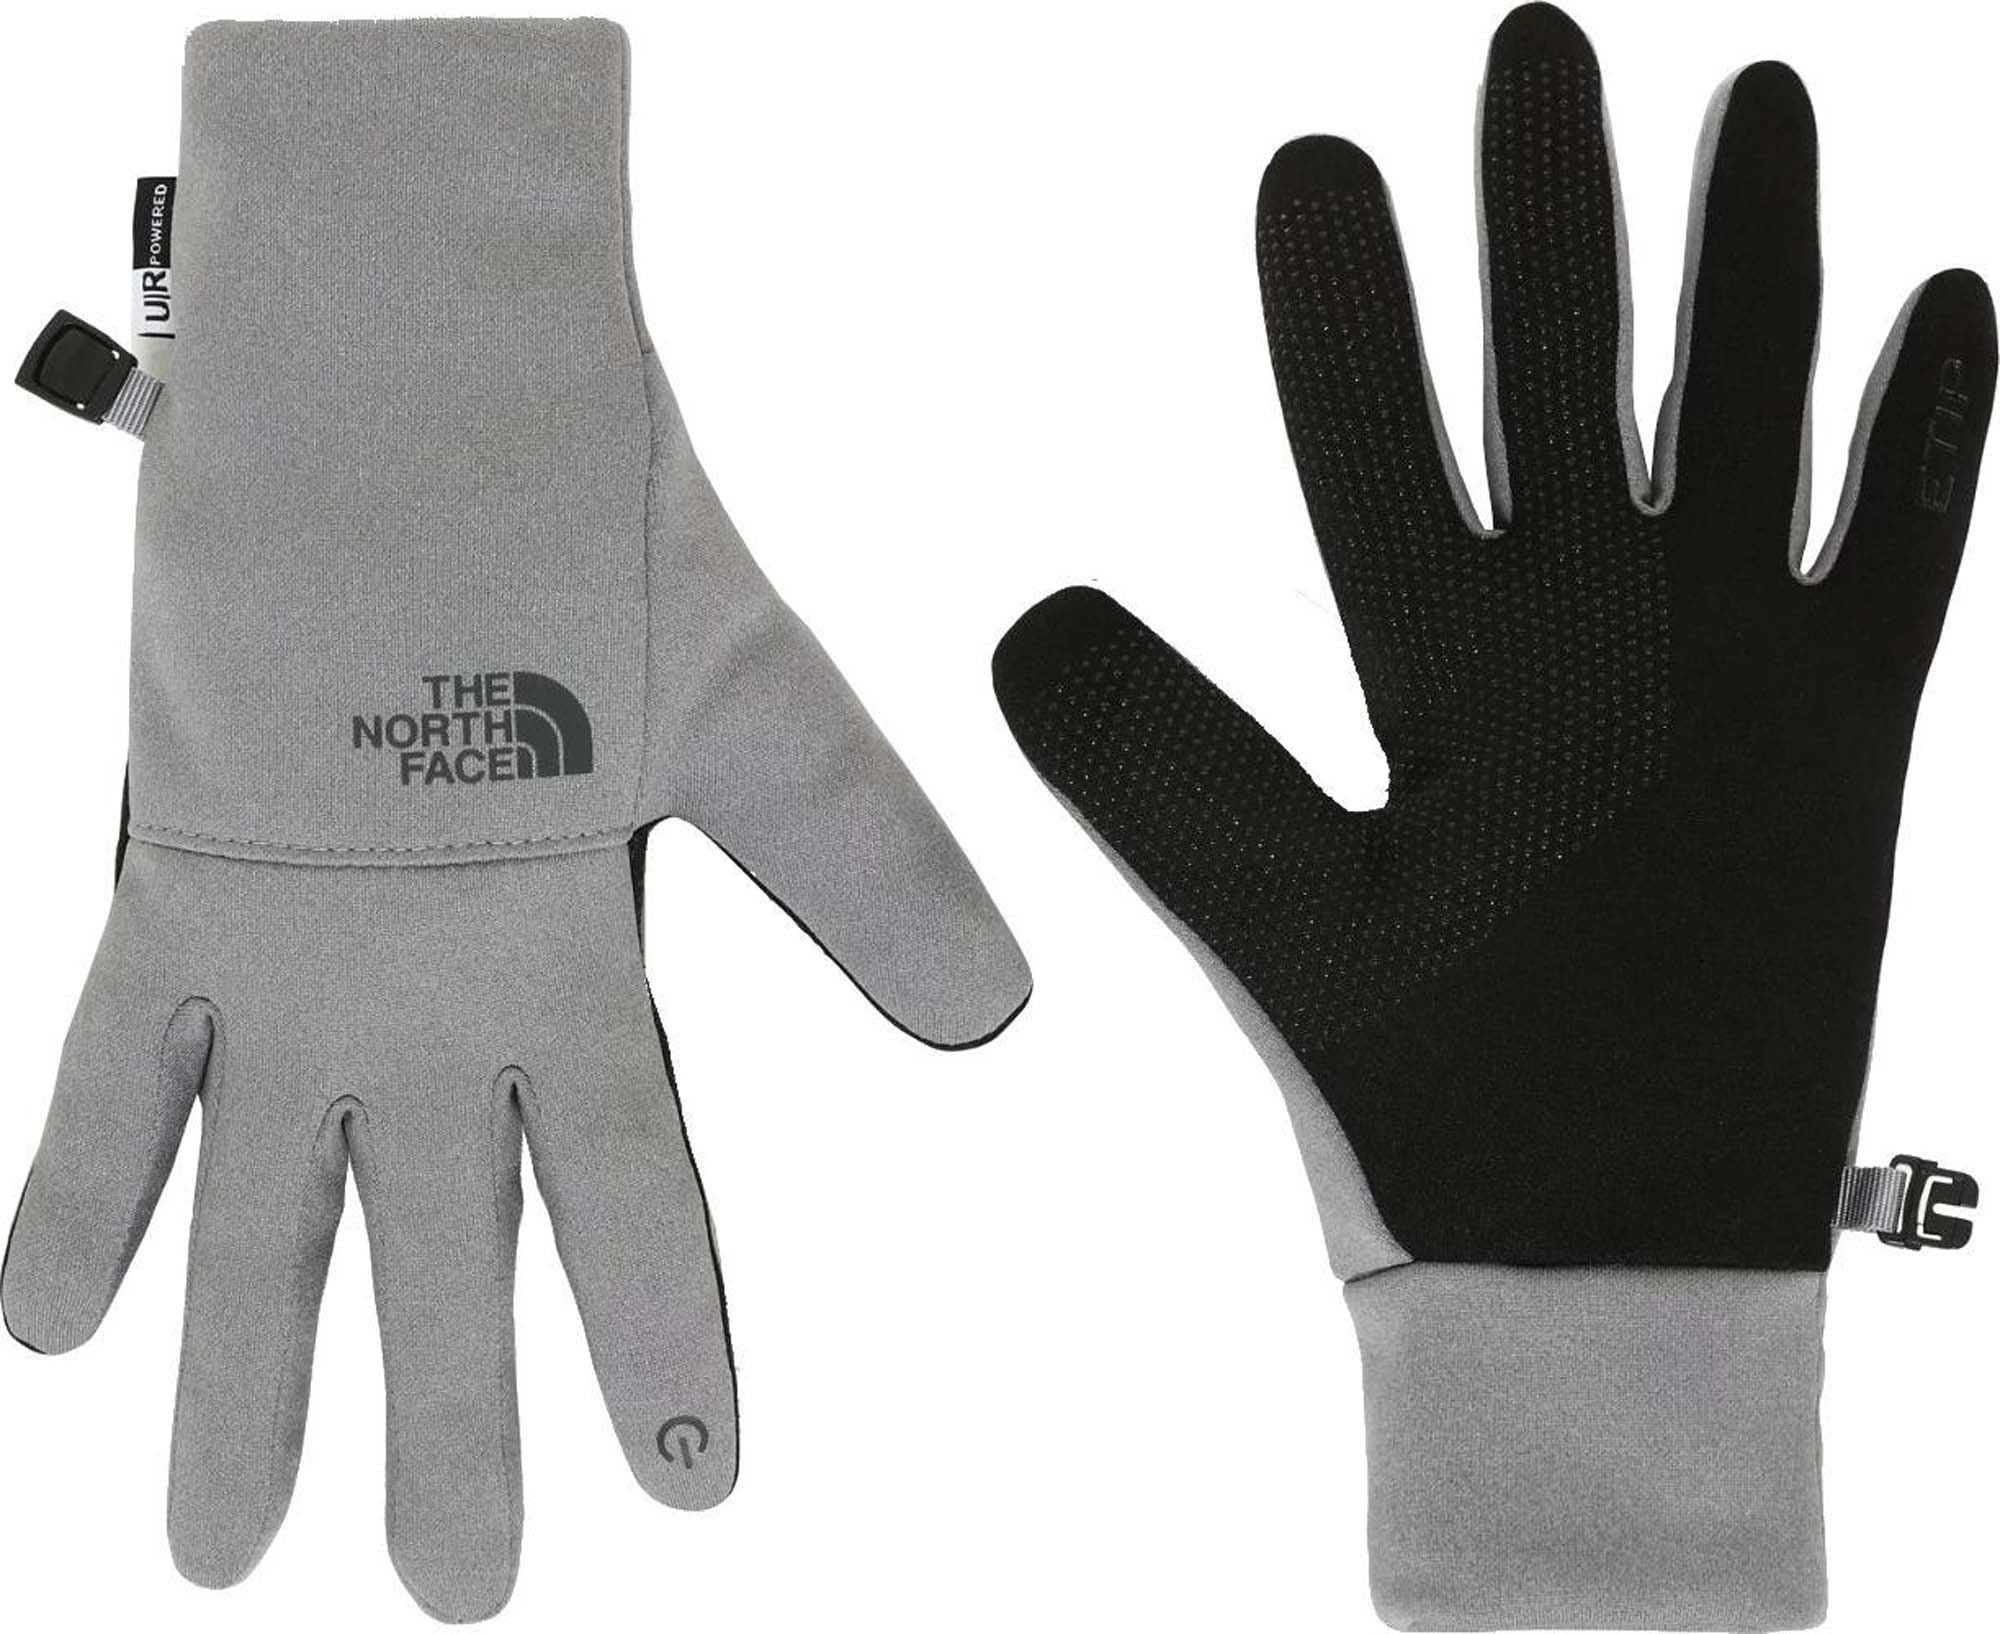 THE NORTH FACE etip recycled glove